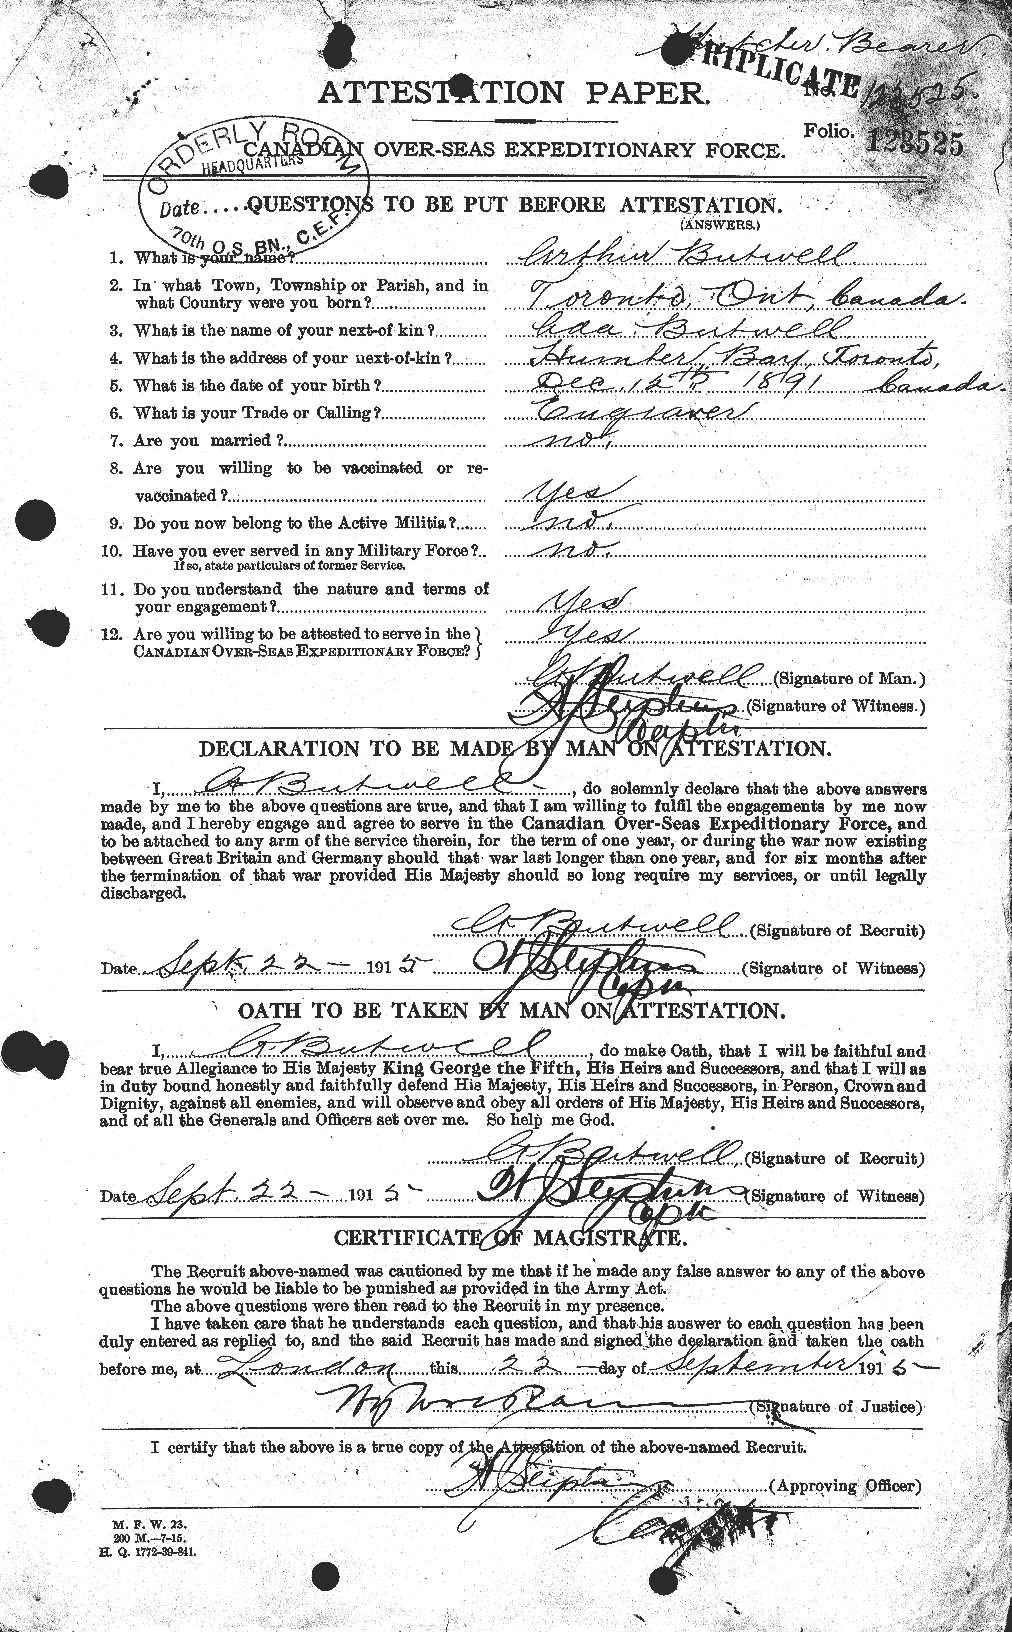 Personnel Records of the First World War - CEF 275554a